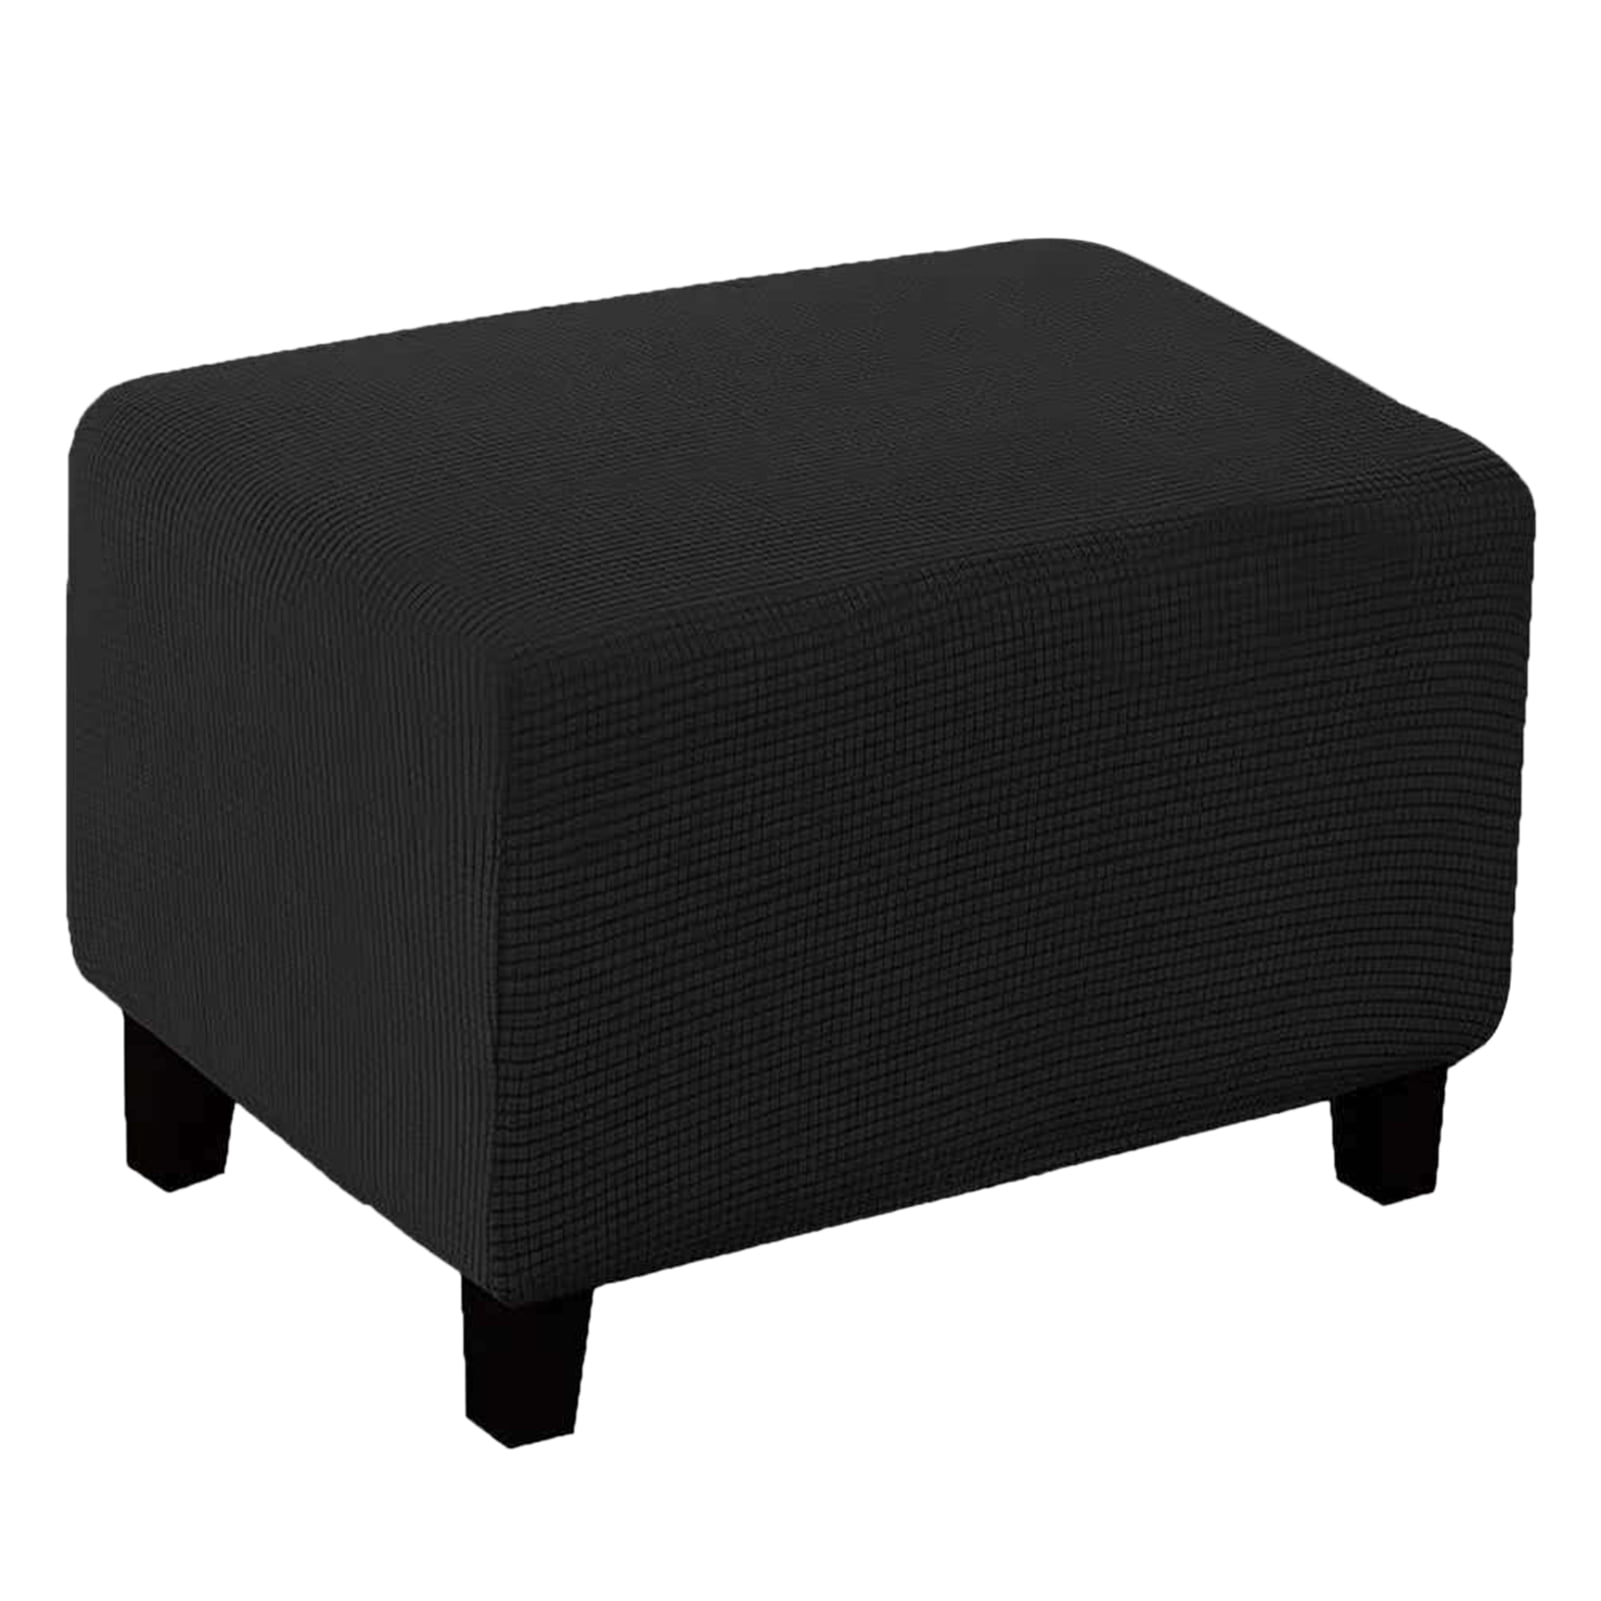 Details about   Footstool Slipcover Rectangle Footrest Protector Storage Ottoman Cover Elastic 